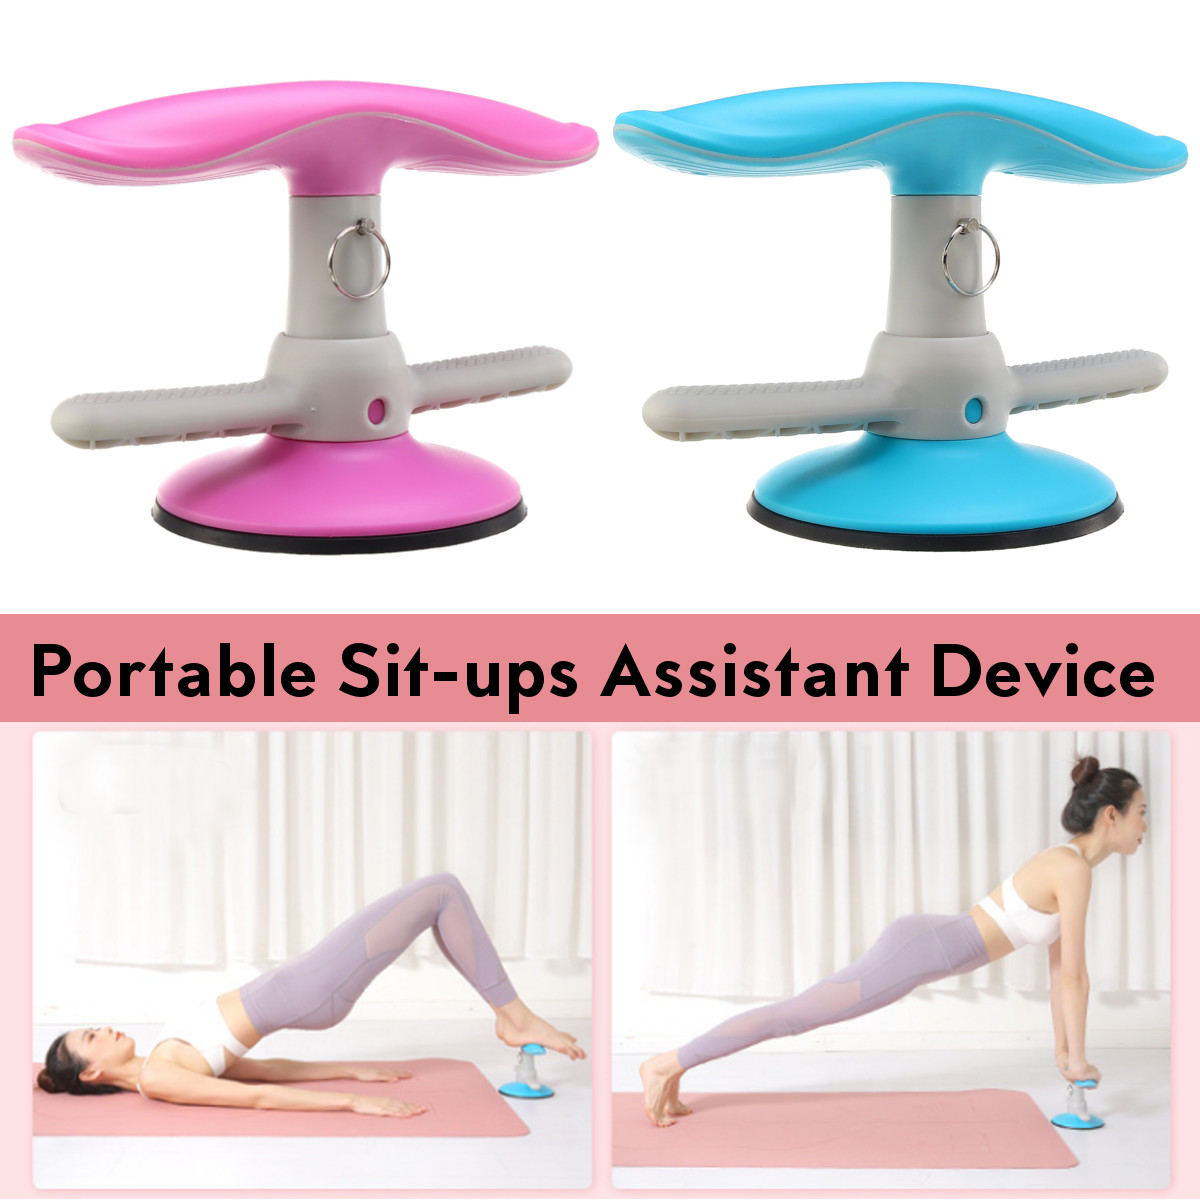 Adjustable-Sit-ups-Assistant-Bar-Body-Waist-Training-Abdomen-Workout-Device-Indoor-Body-Shaping-Exer-1697406-1